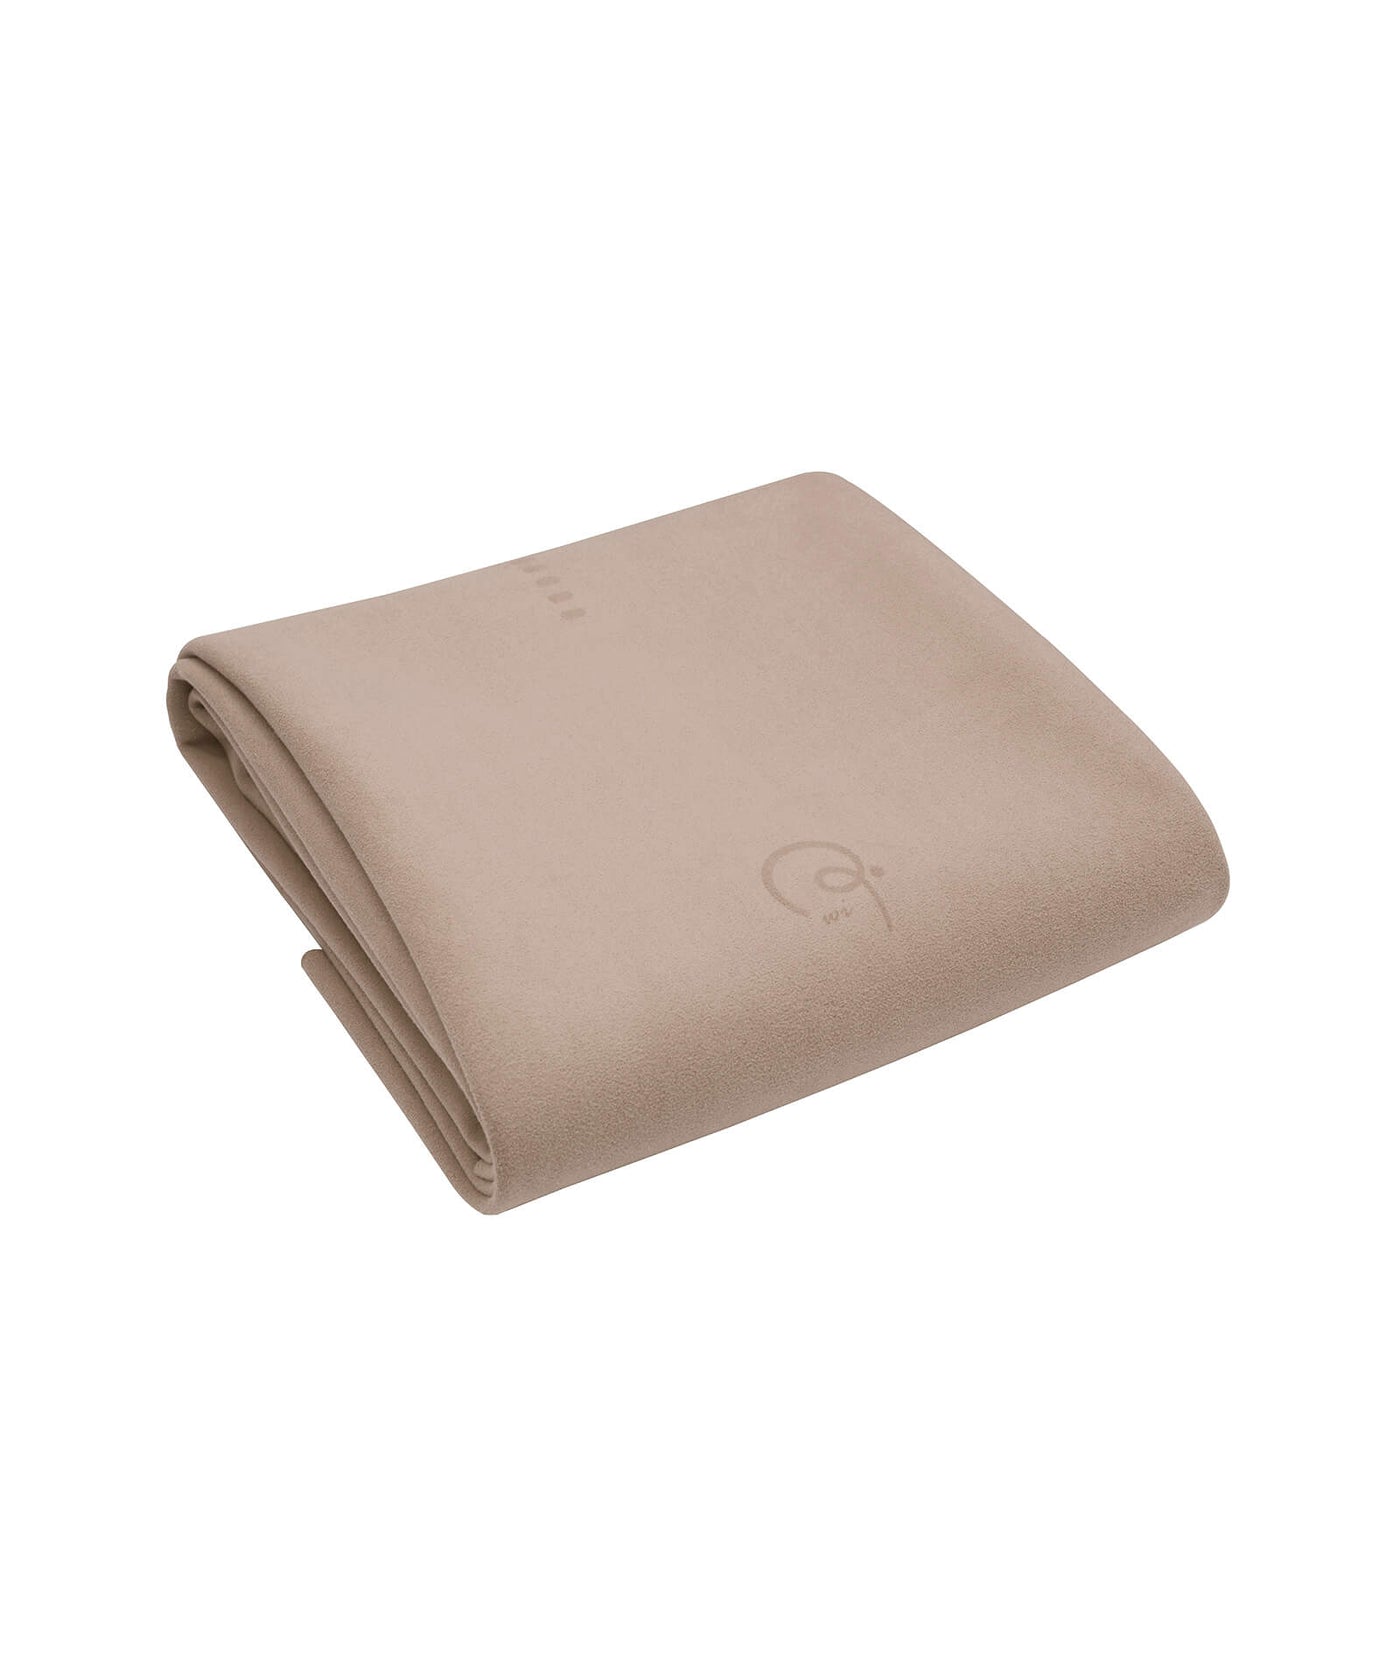 Touch Mat For Exercise, Touch Mat Pastel Beige